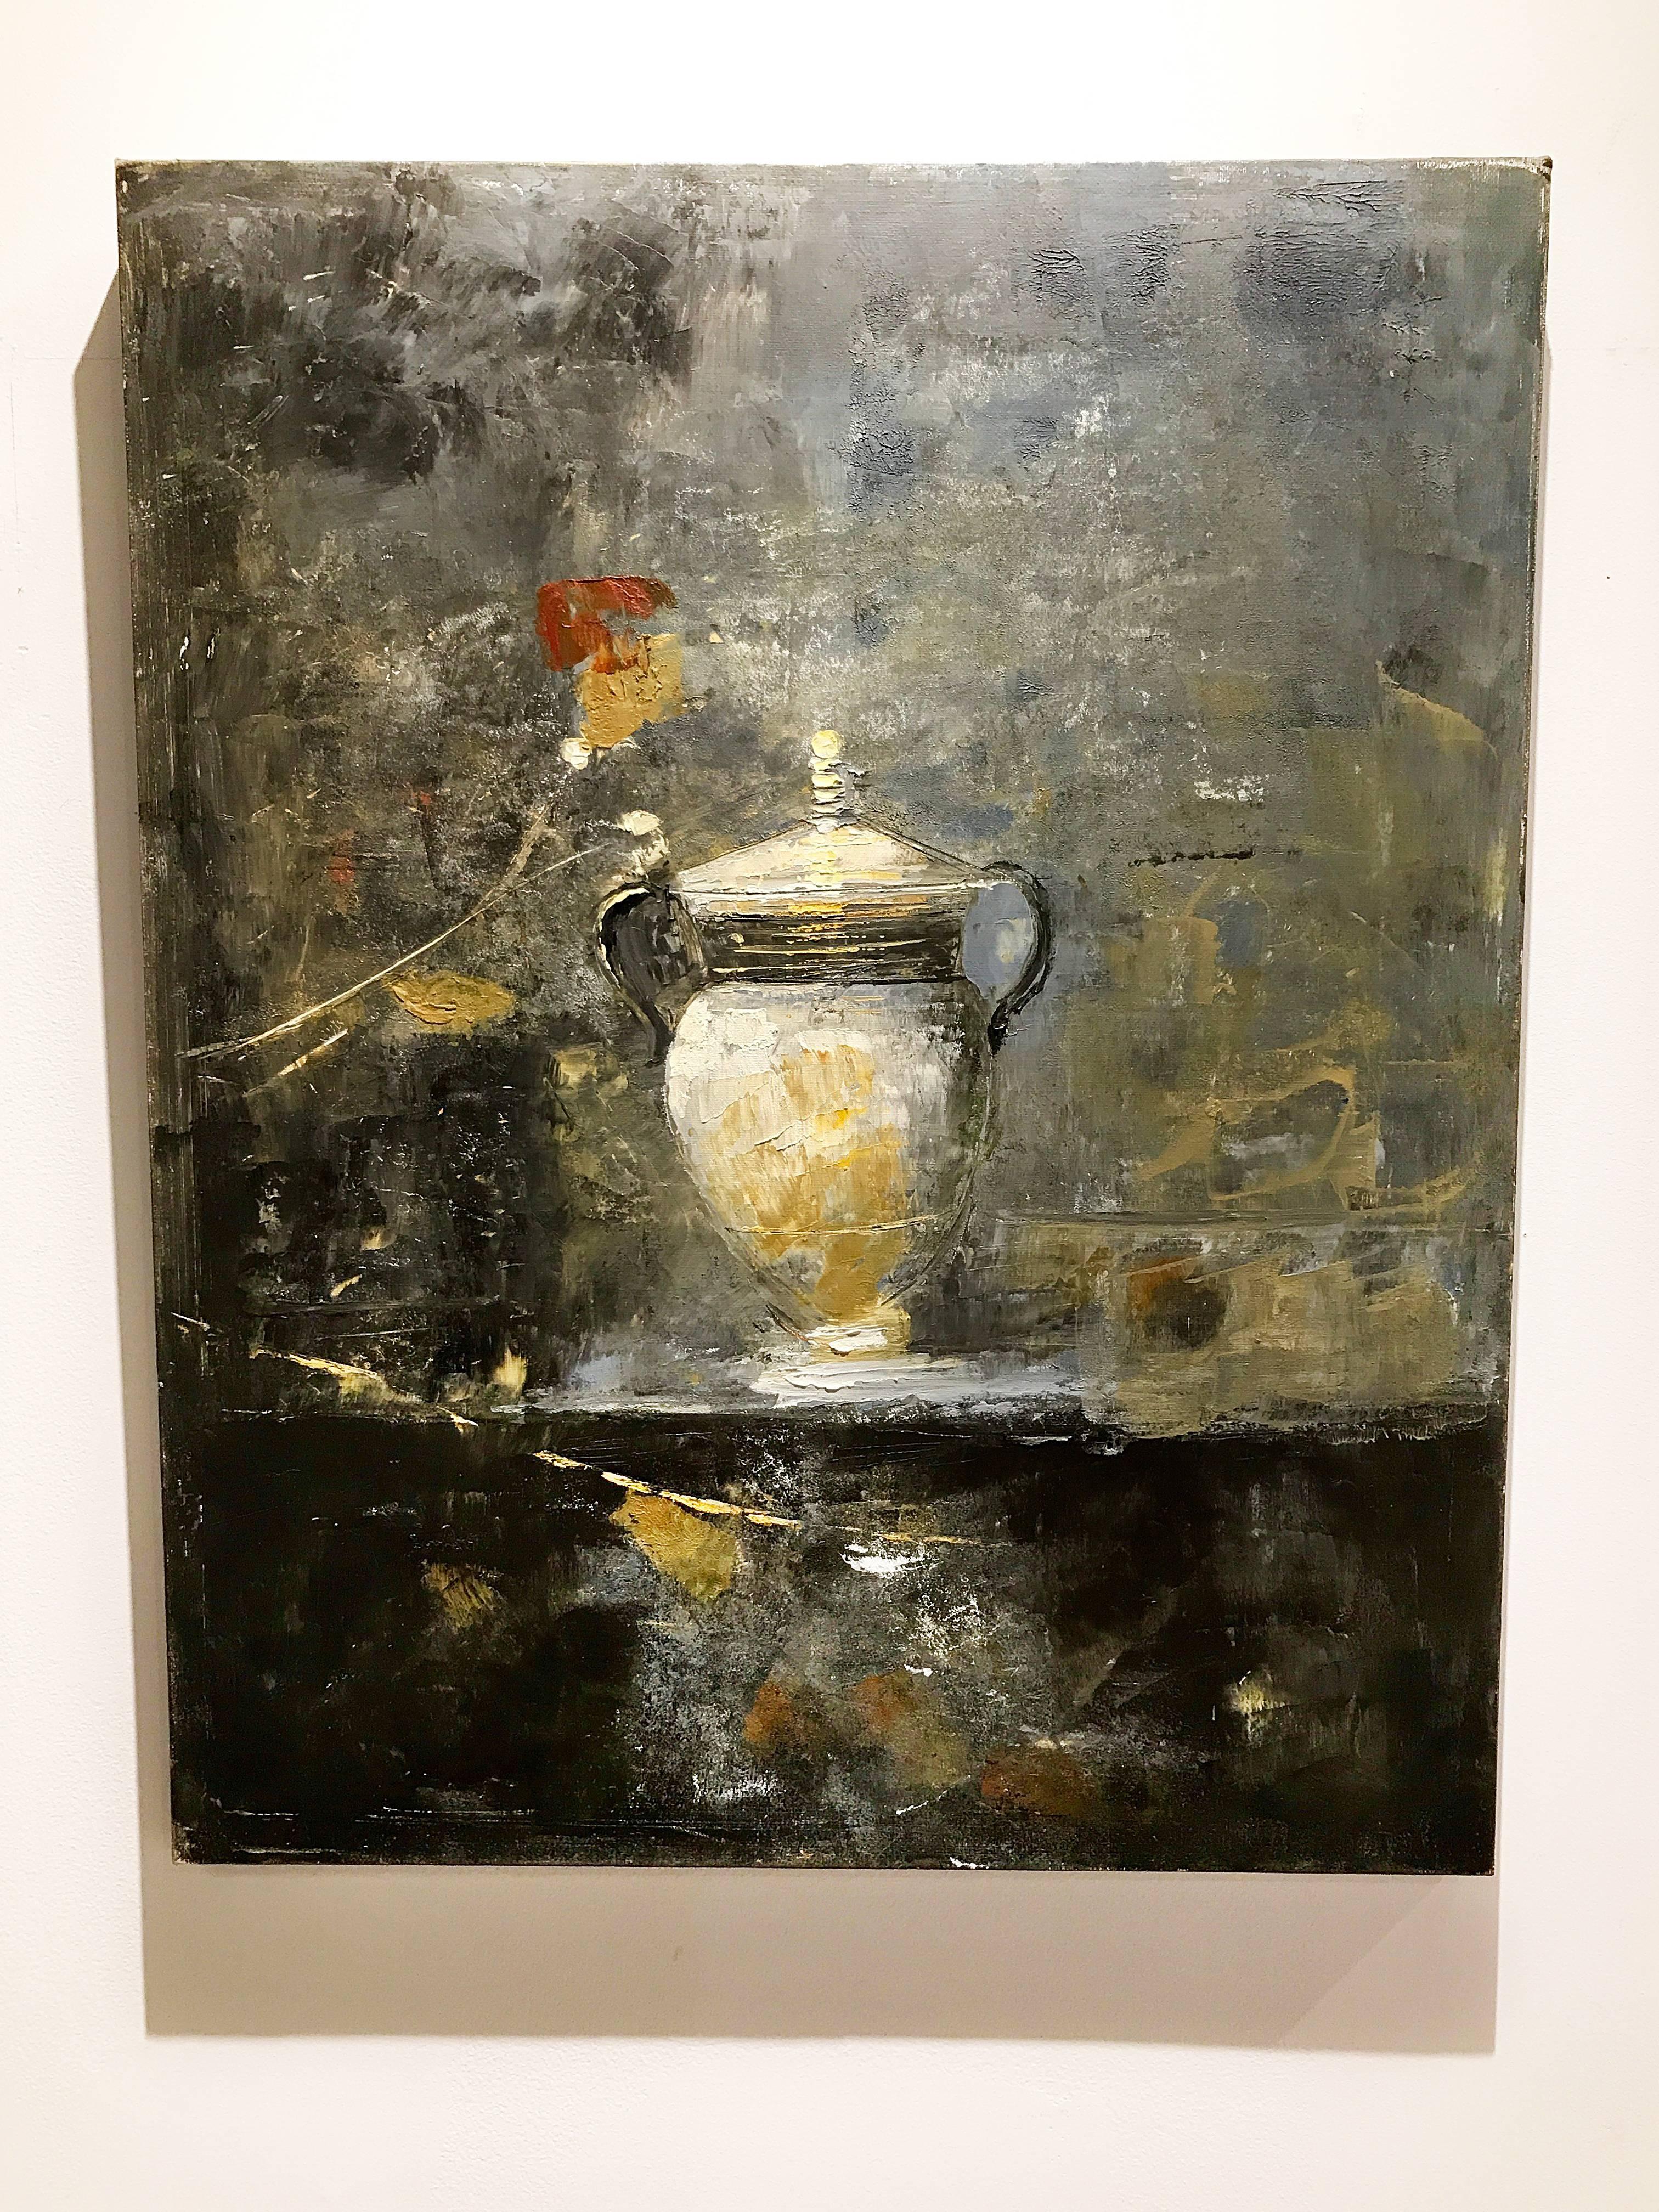 China Vase, oil painting on canvas - Contemporary Painting by Goxwa